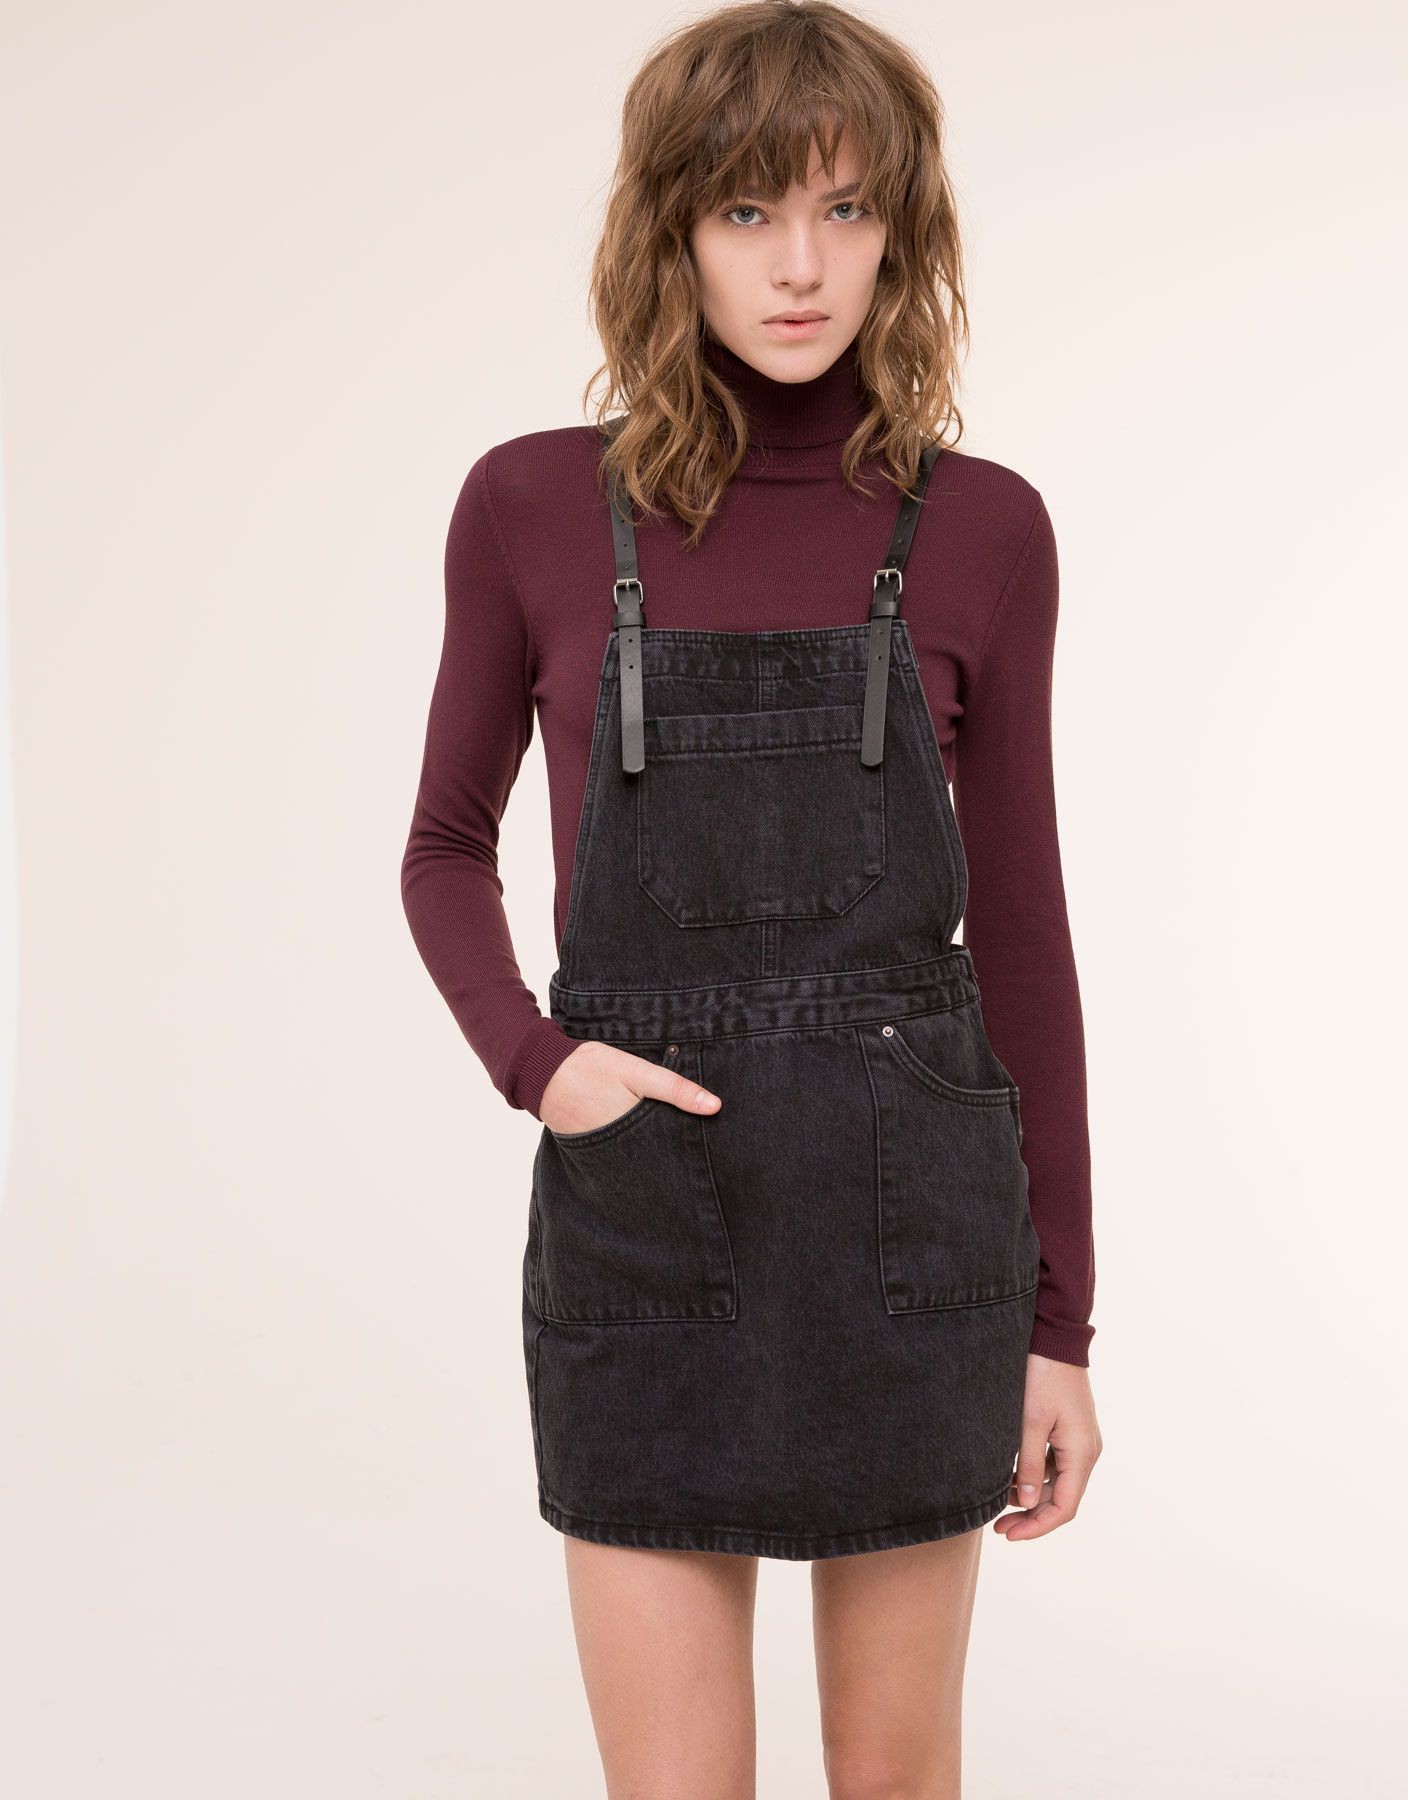 Maroon and black clothing ideas with little black dress, cocktail dress, little black dress, day dress, jeans: Cocktail Dresses,  fashion model,  day dress,  Little Black Dress,  Maroon And Black Outfit,  Jumper Dress  